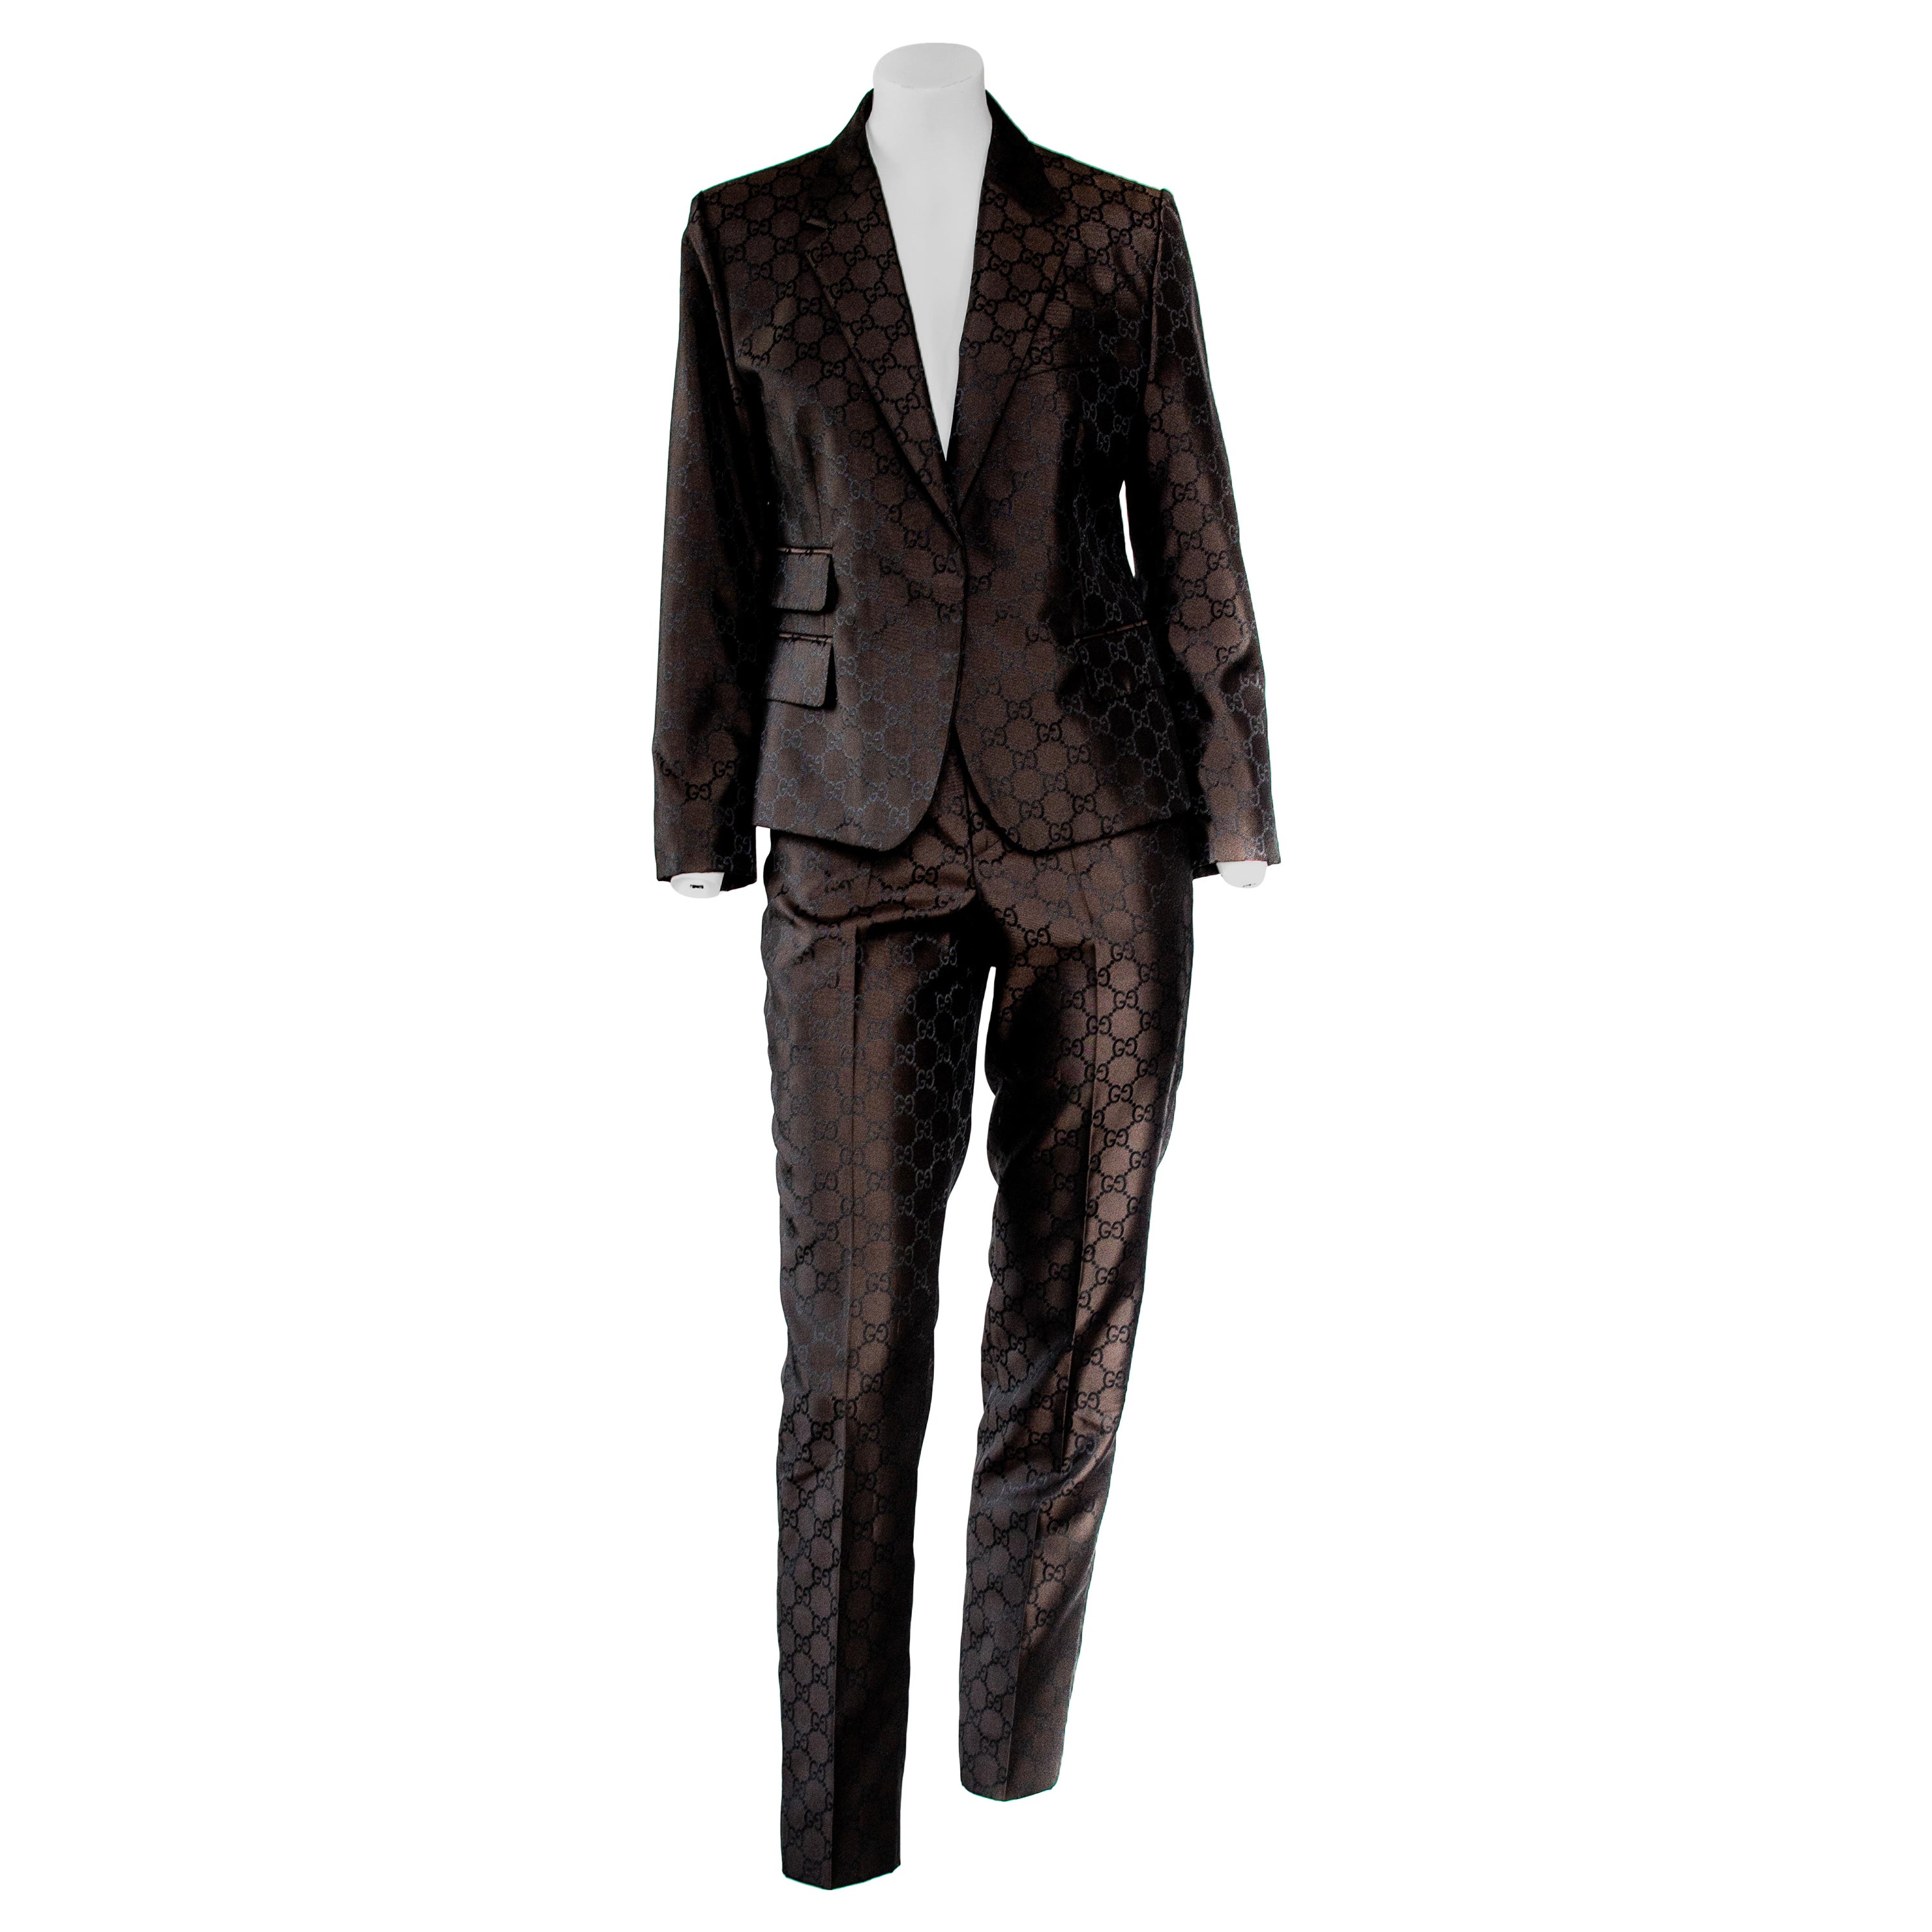 S/S 1998 Gucci by Tom Ford Woven GG Monogram Satin Brown Pantsuit For Sale